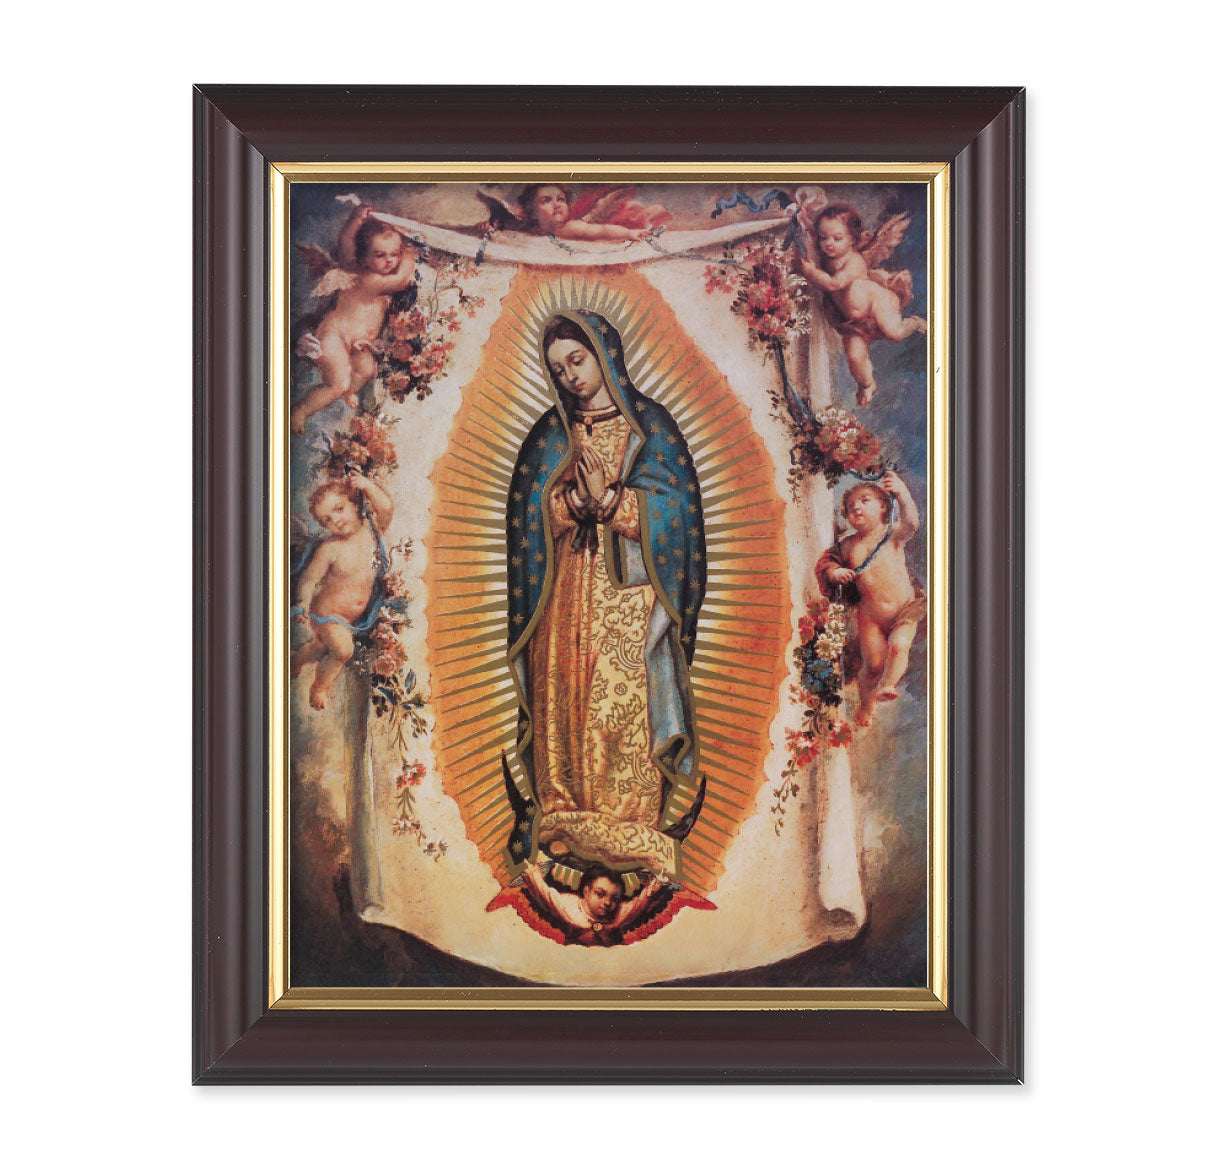 Our Lady of Guadalupe with Angels Walnut Framed Art